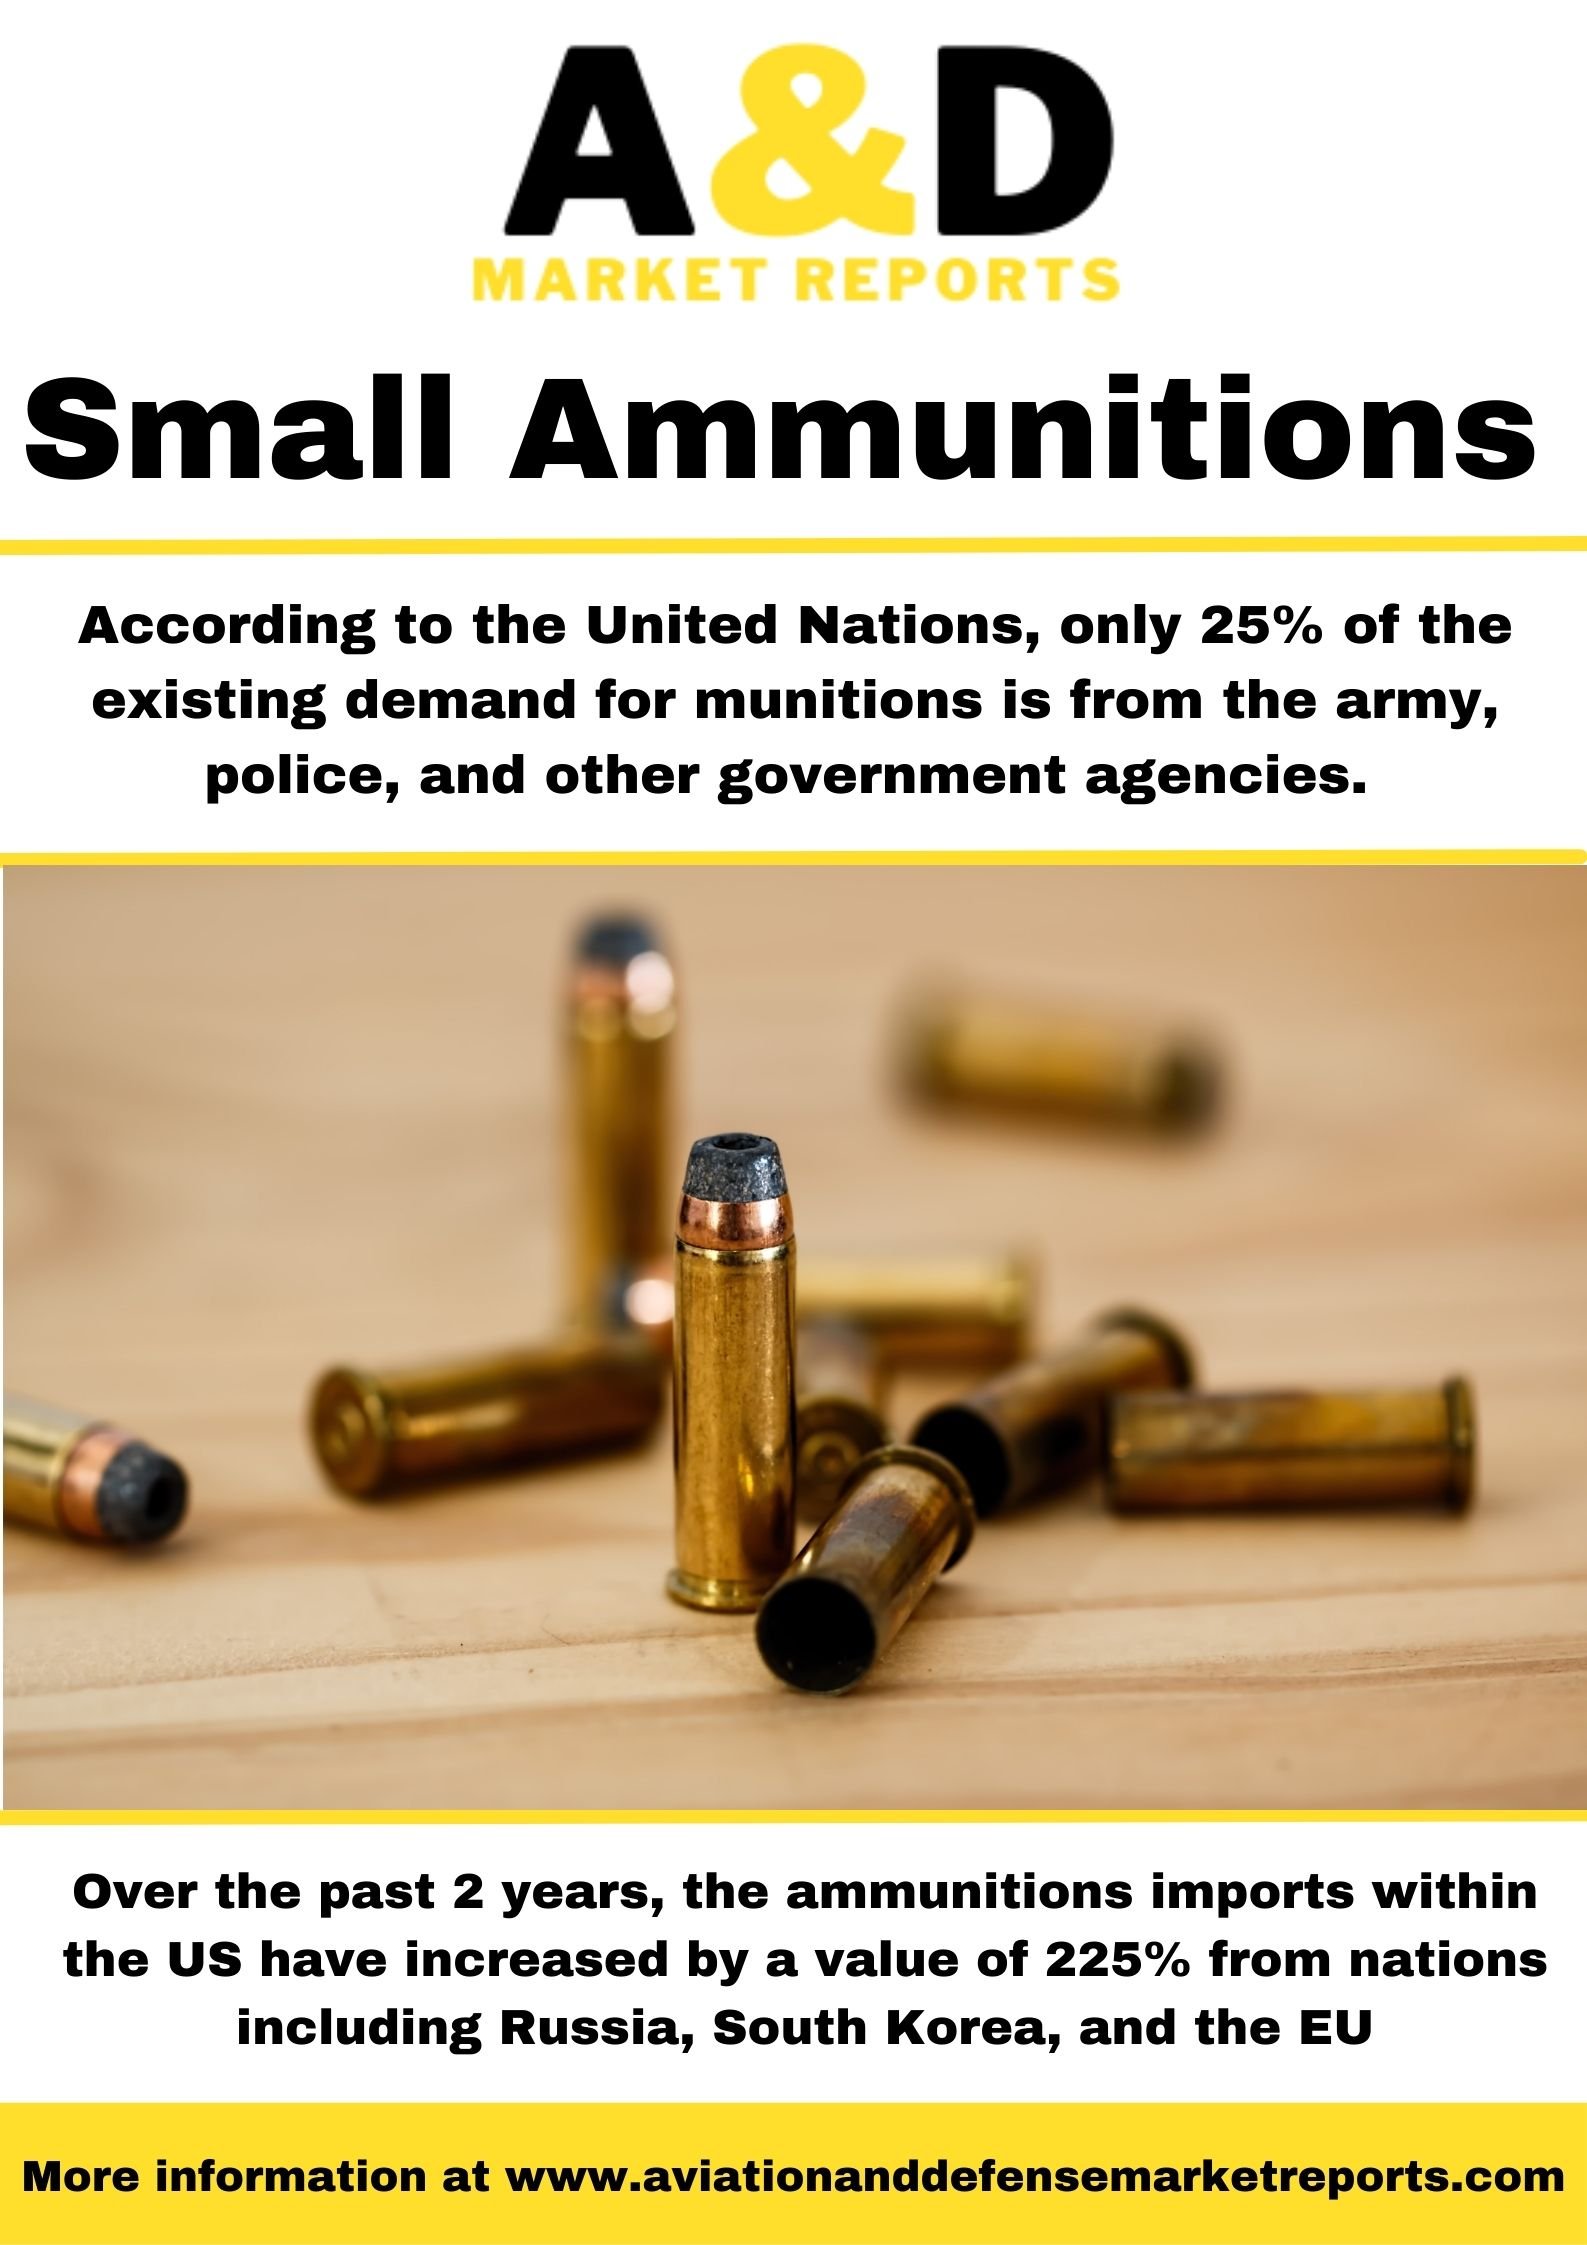 What are small ammunition?